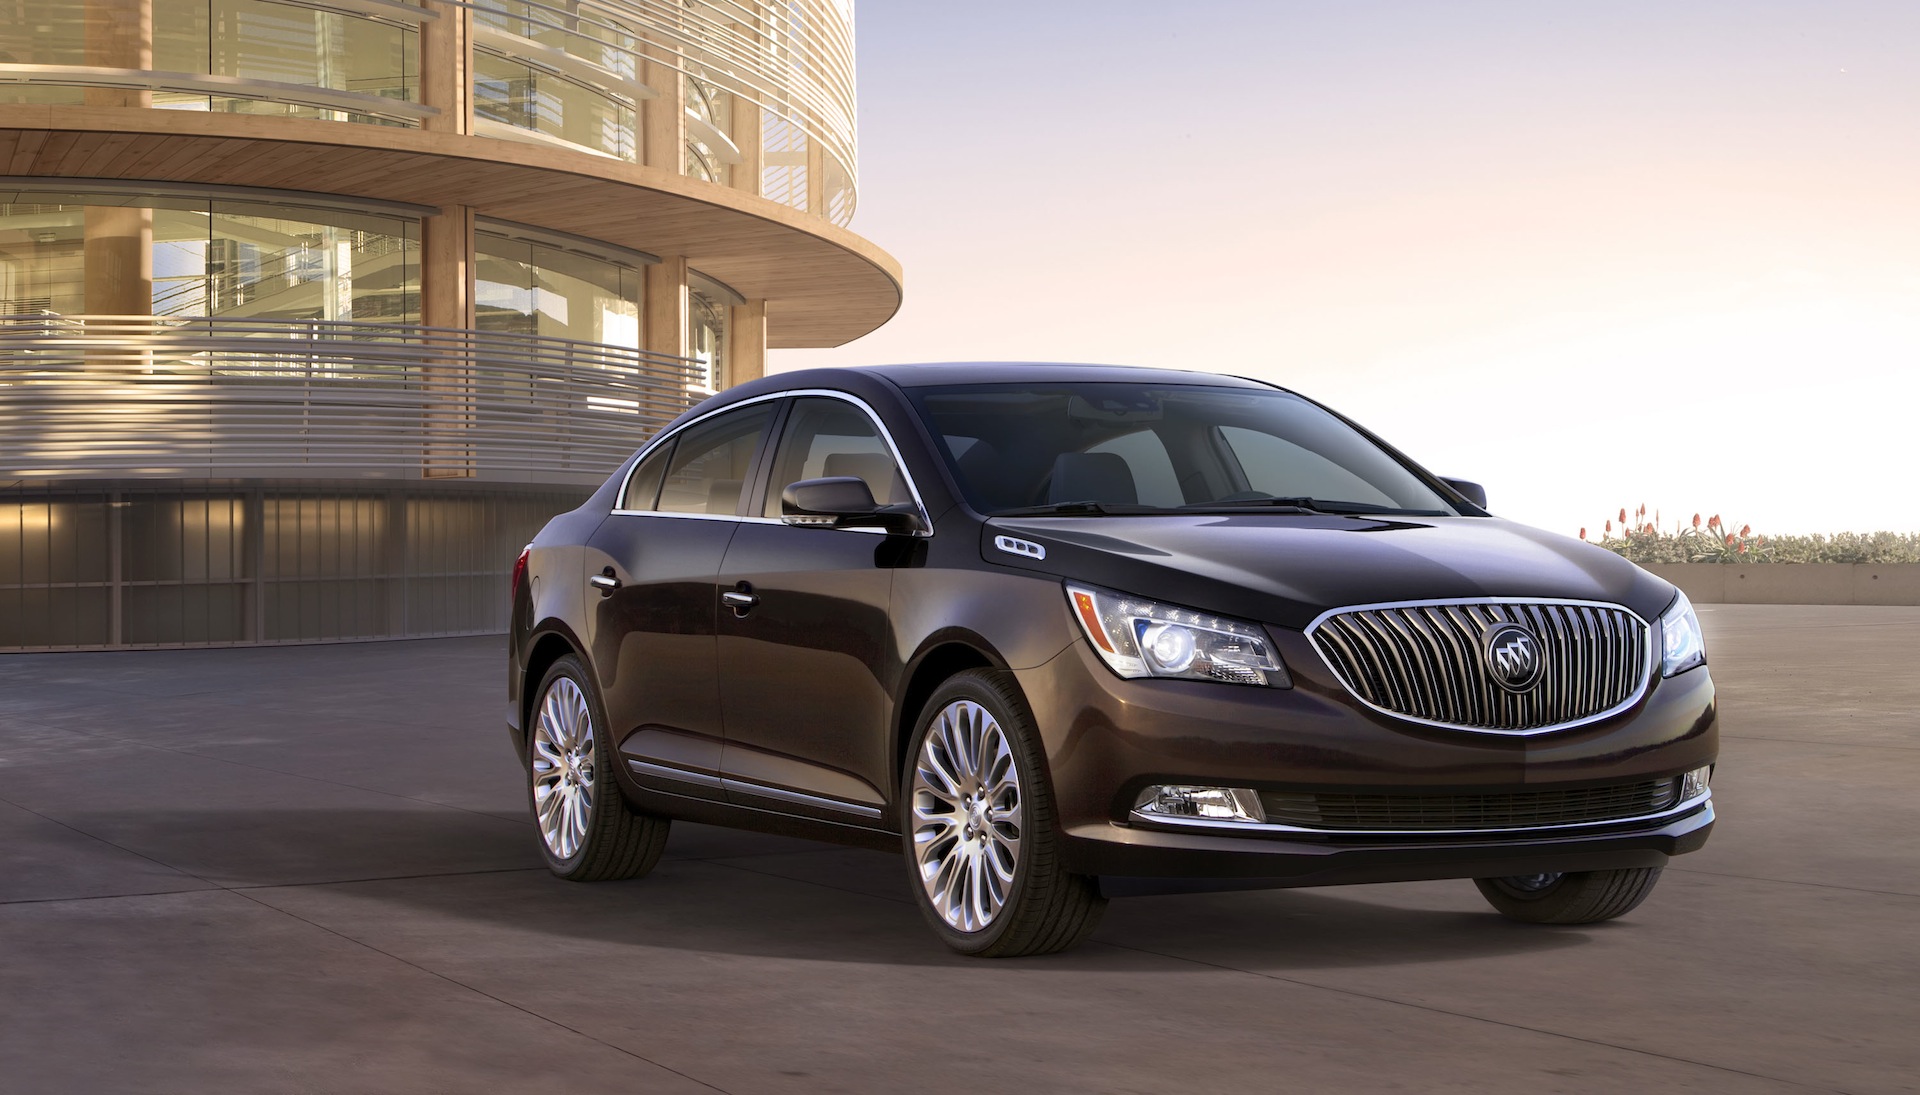 2014 Buick Lacrosse Review, Ratings, Specs, Prices, and Photos - The